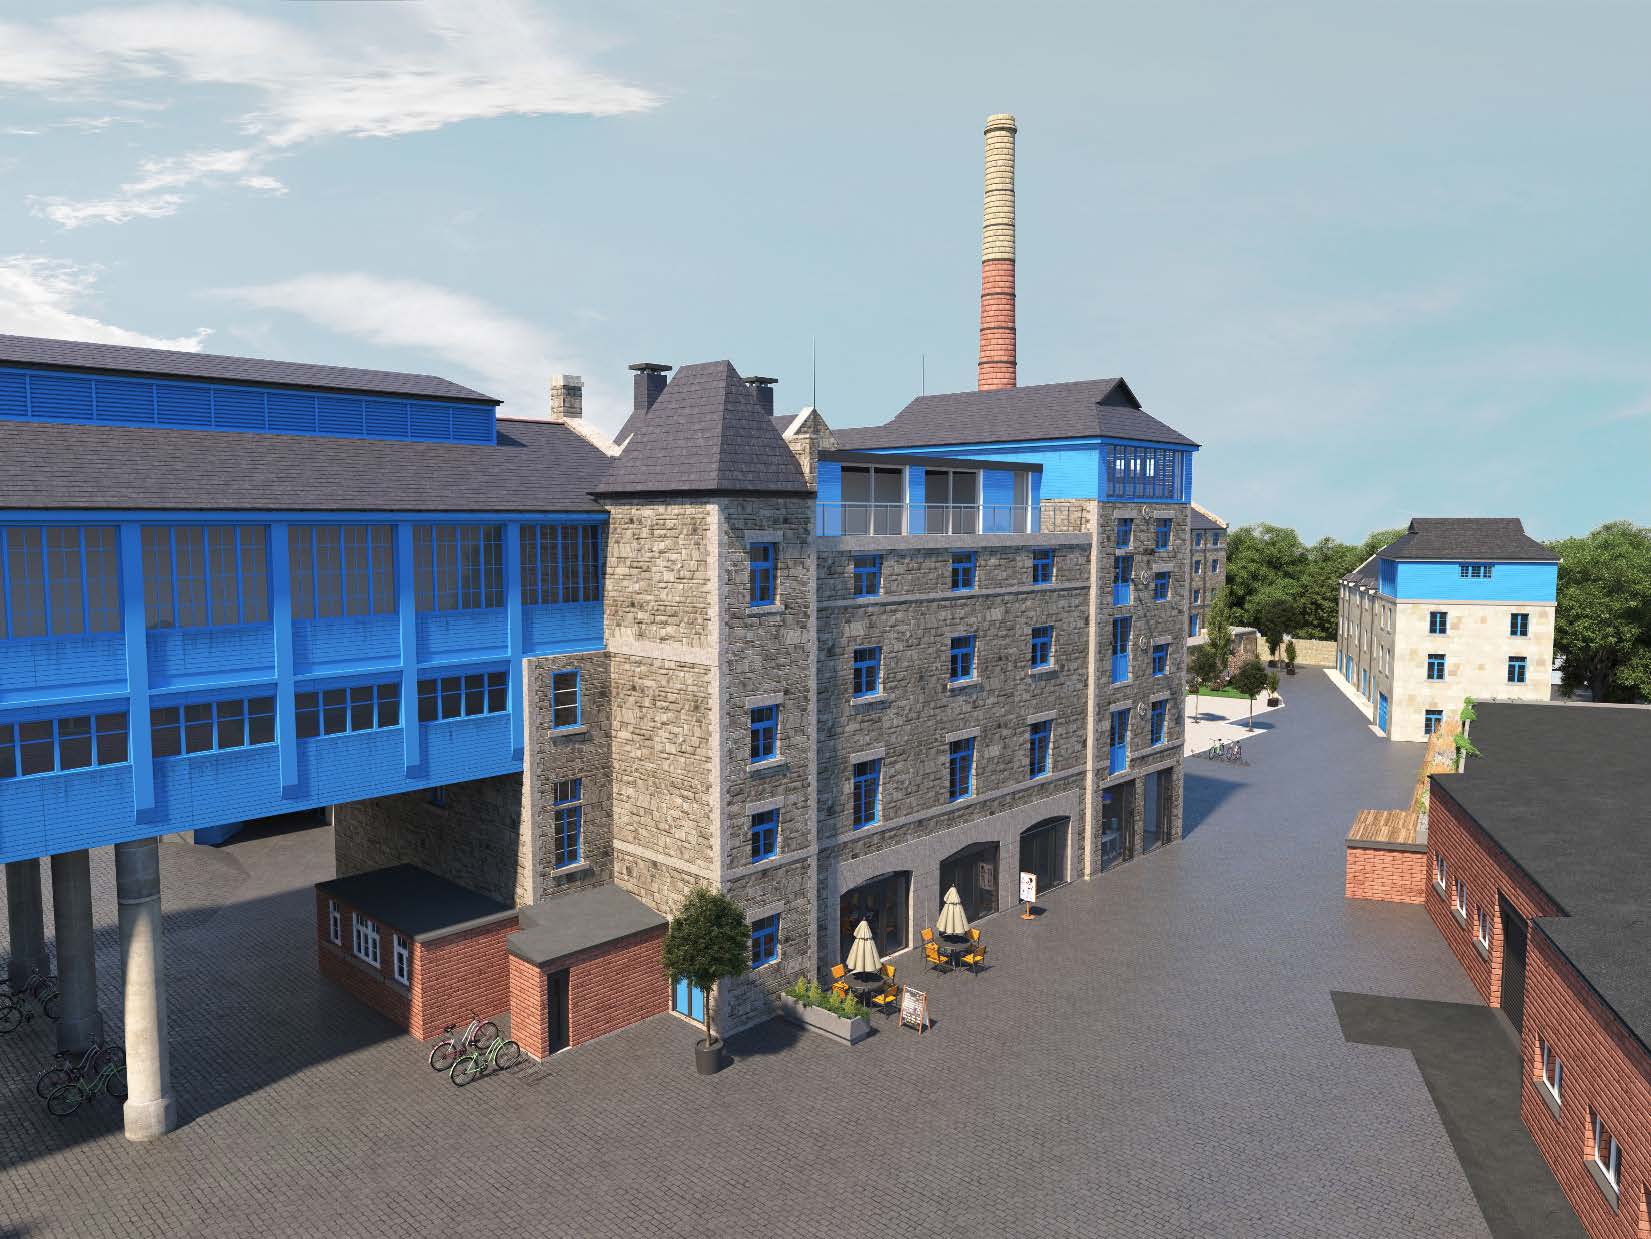 Offers invited for delivery of homes at former Edinburgh brewery site